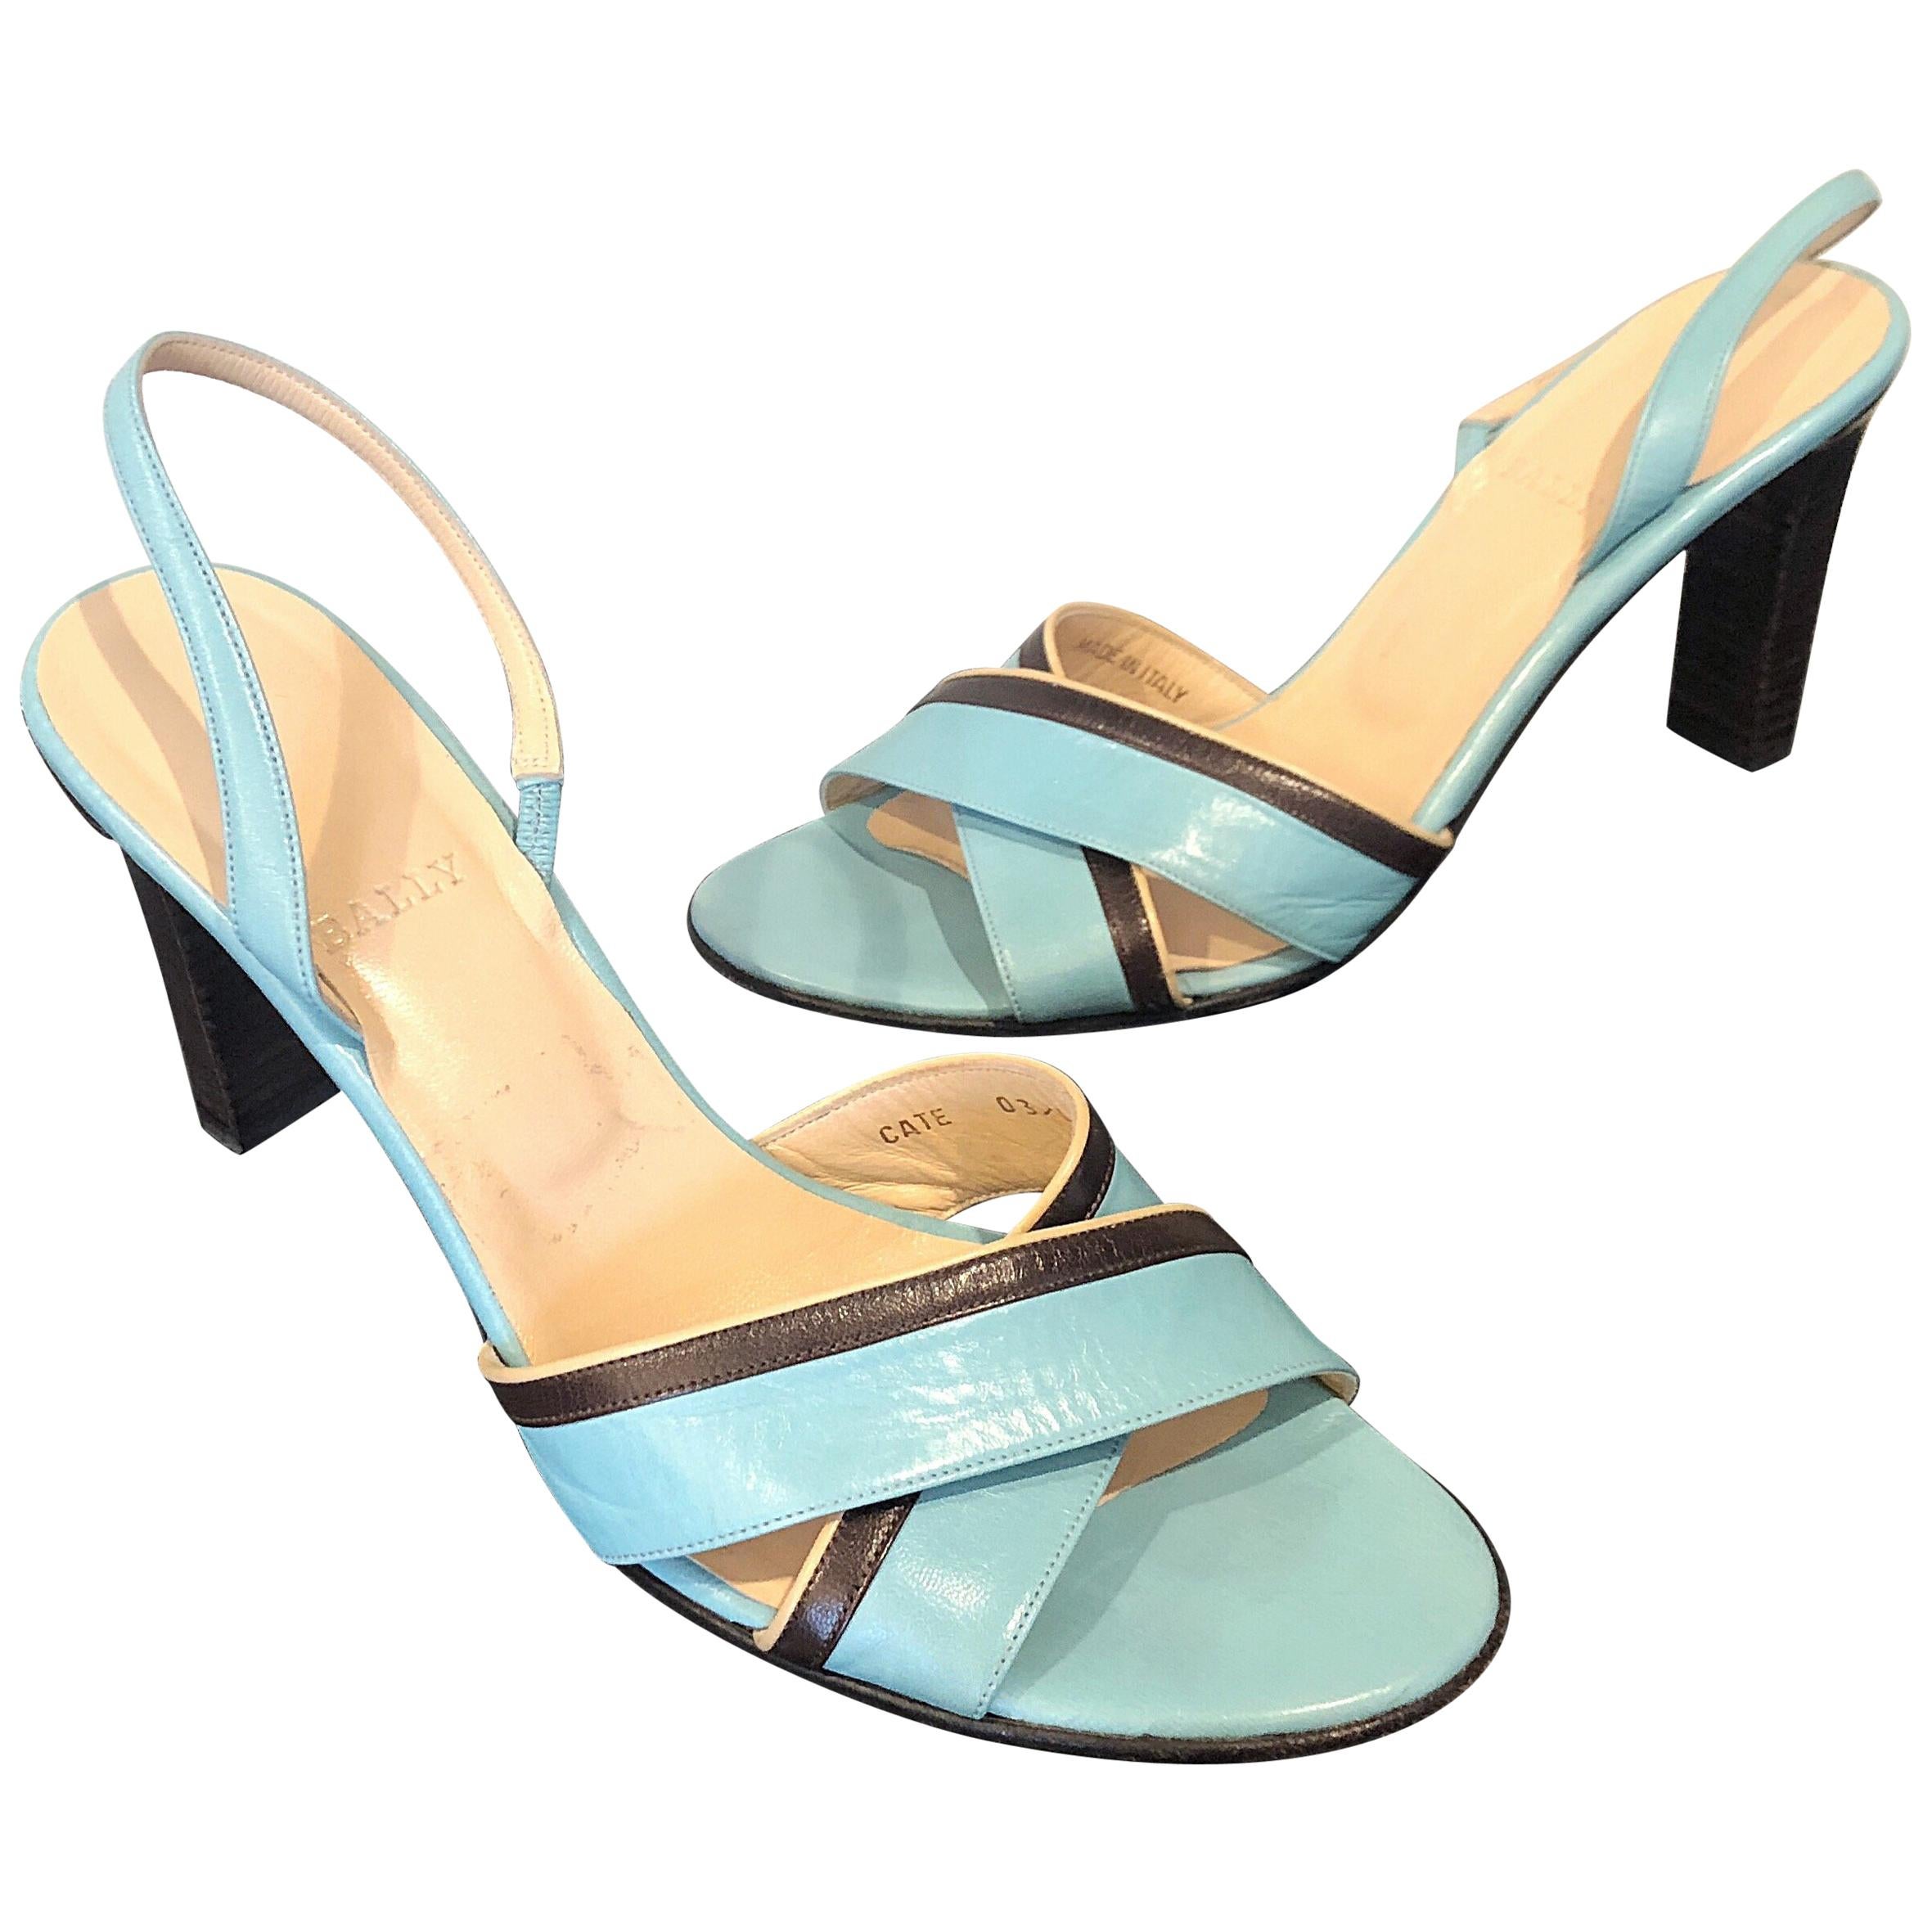 1990s Bally Sz 10 / 40.5 Robins Egg Blue Leather Vintage Stacked Heel Sandals